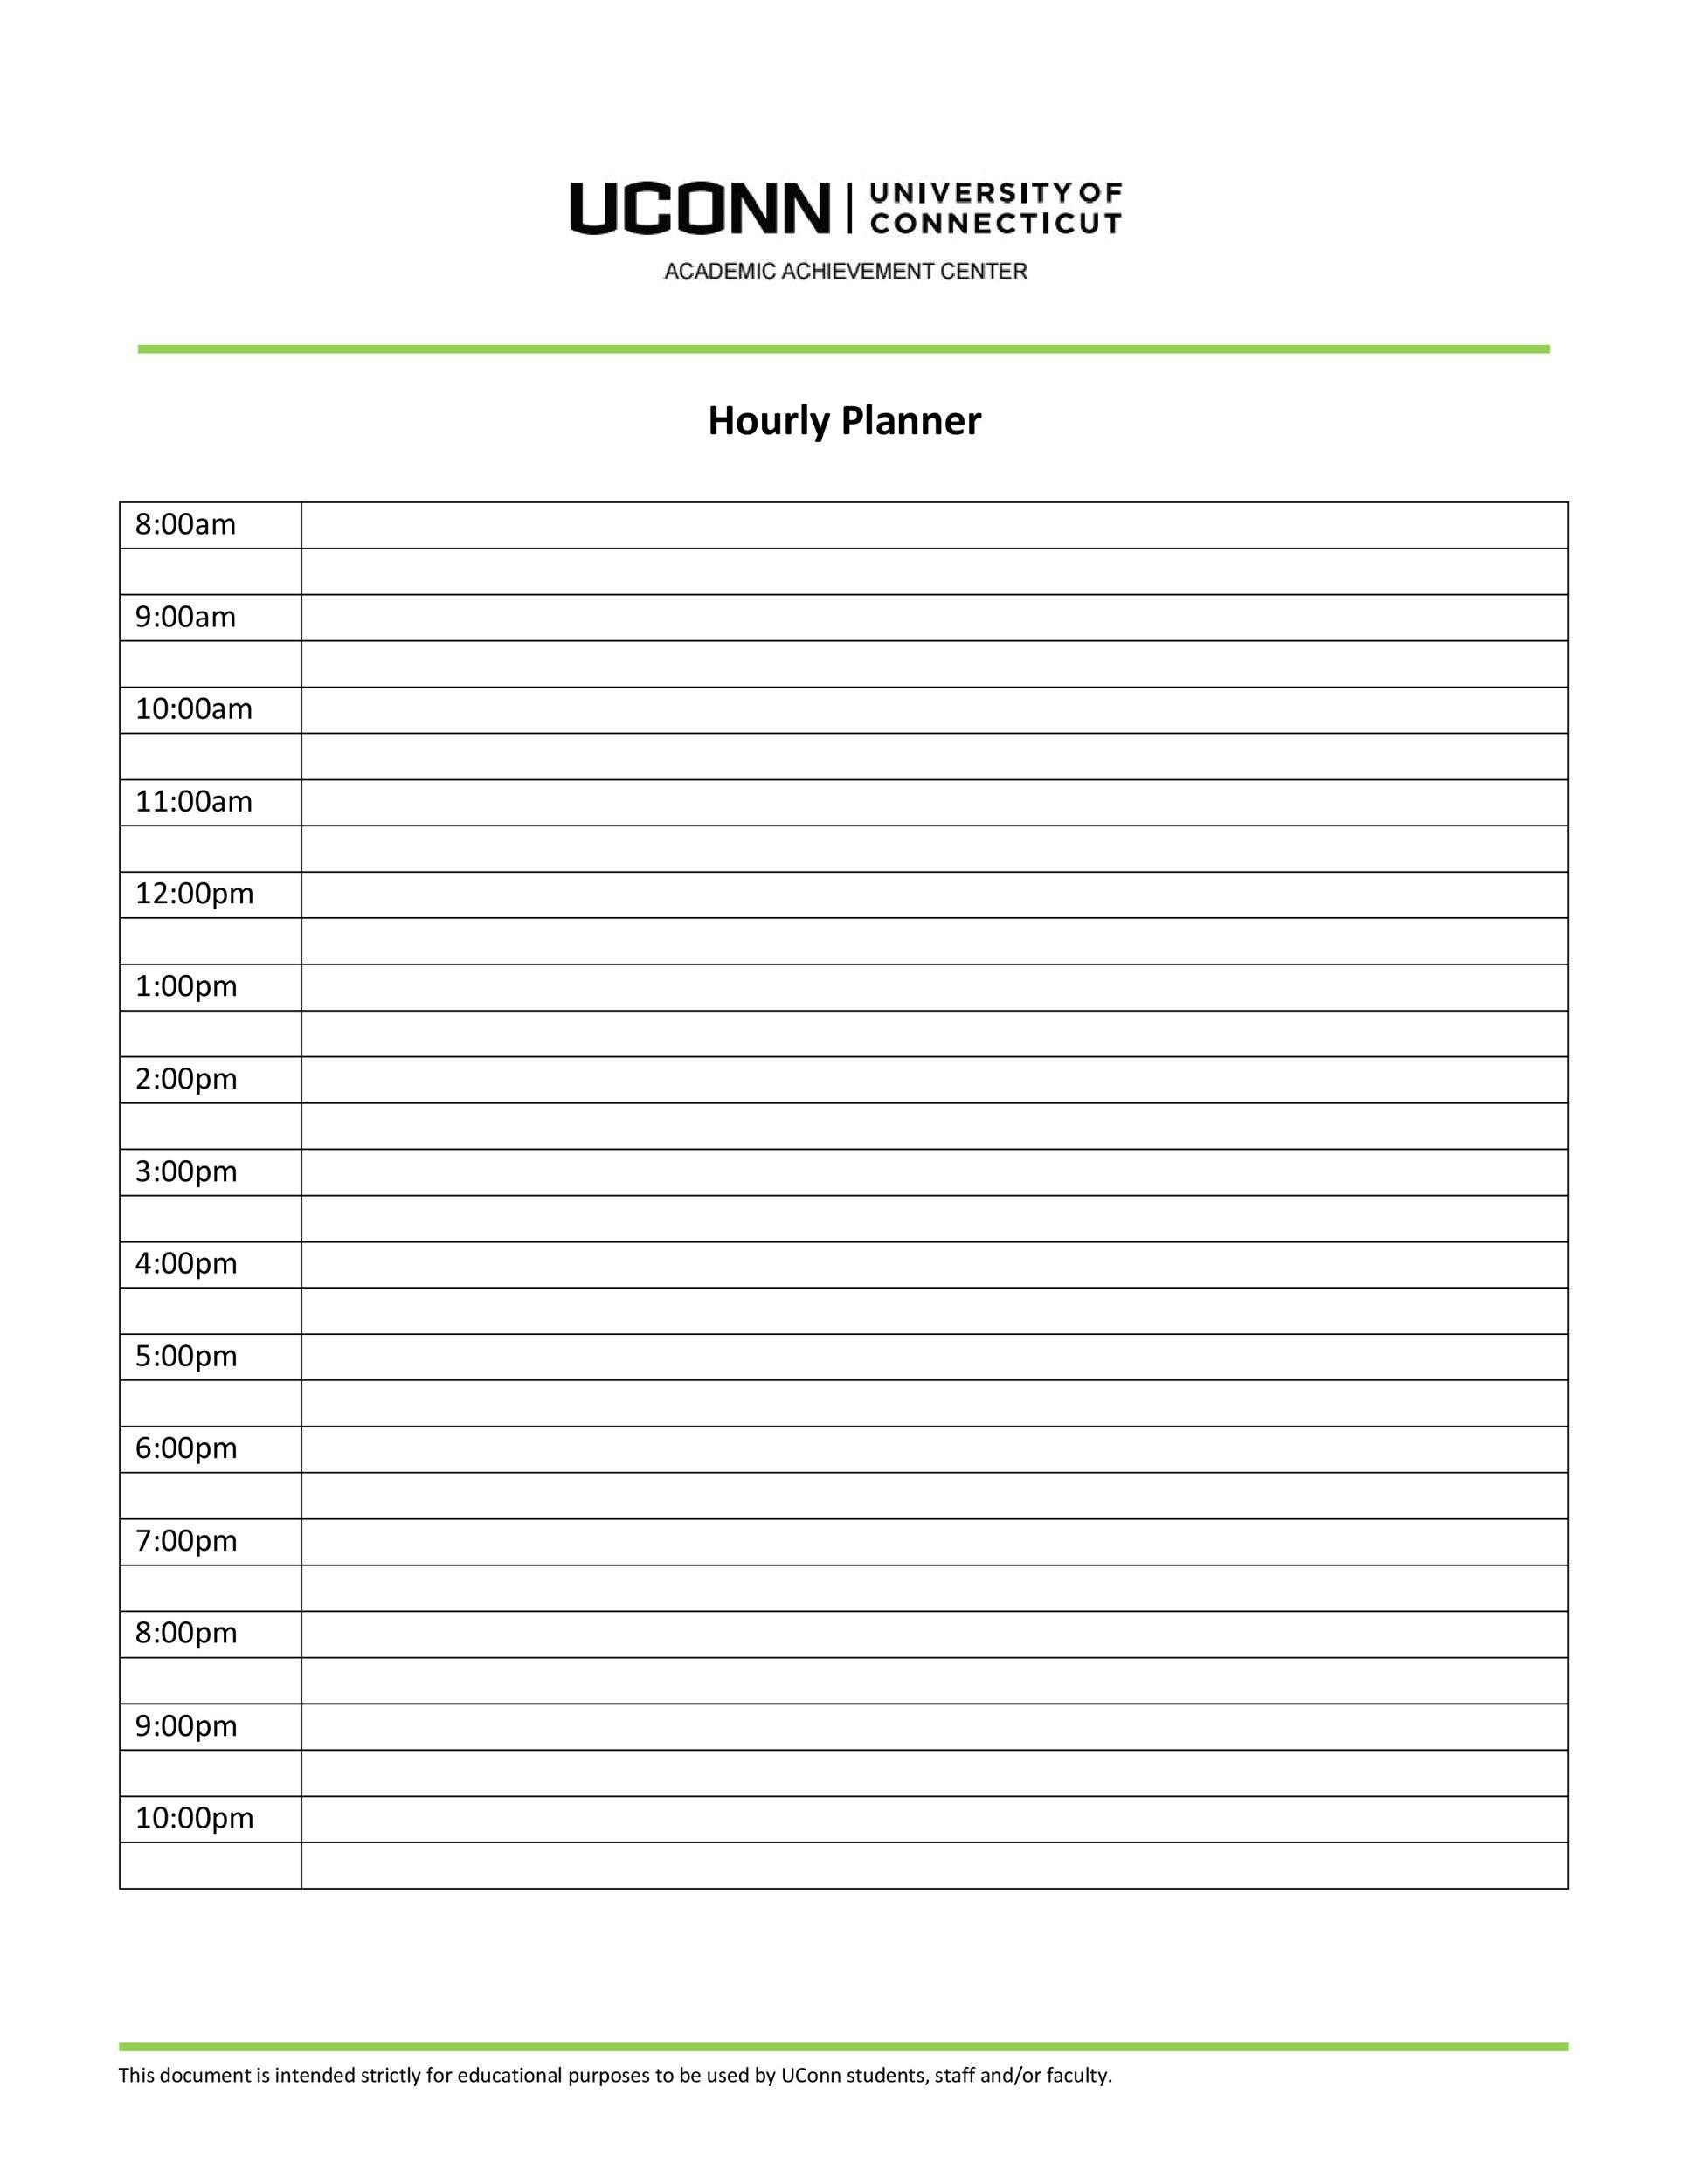 free-hourly-schedules-in-pdf-format-20-templates